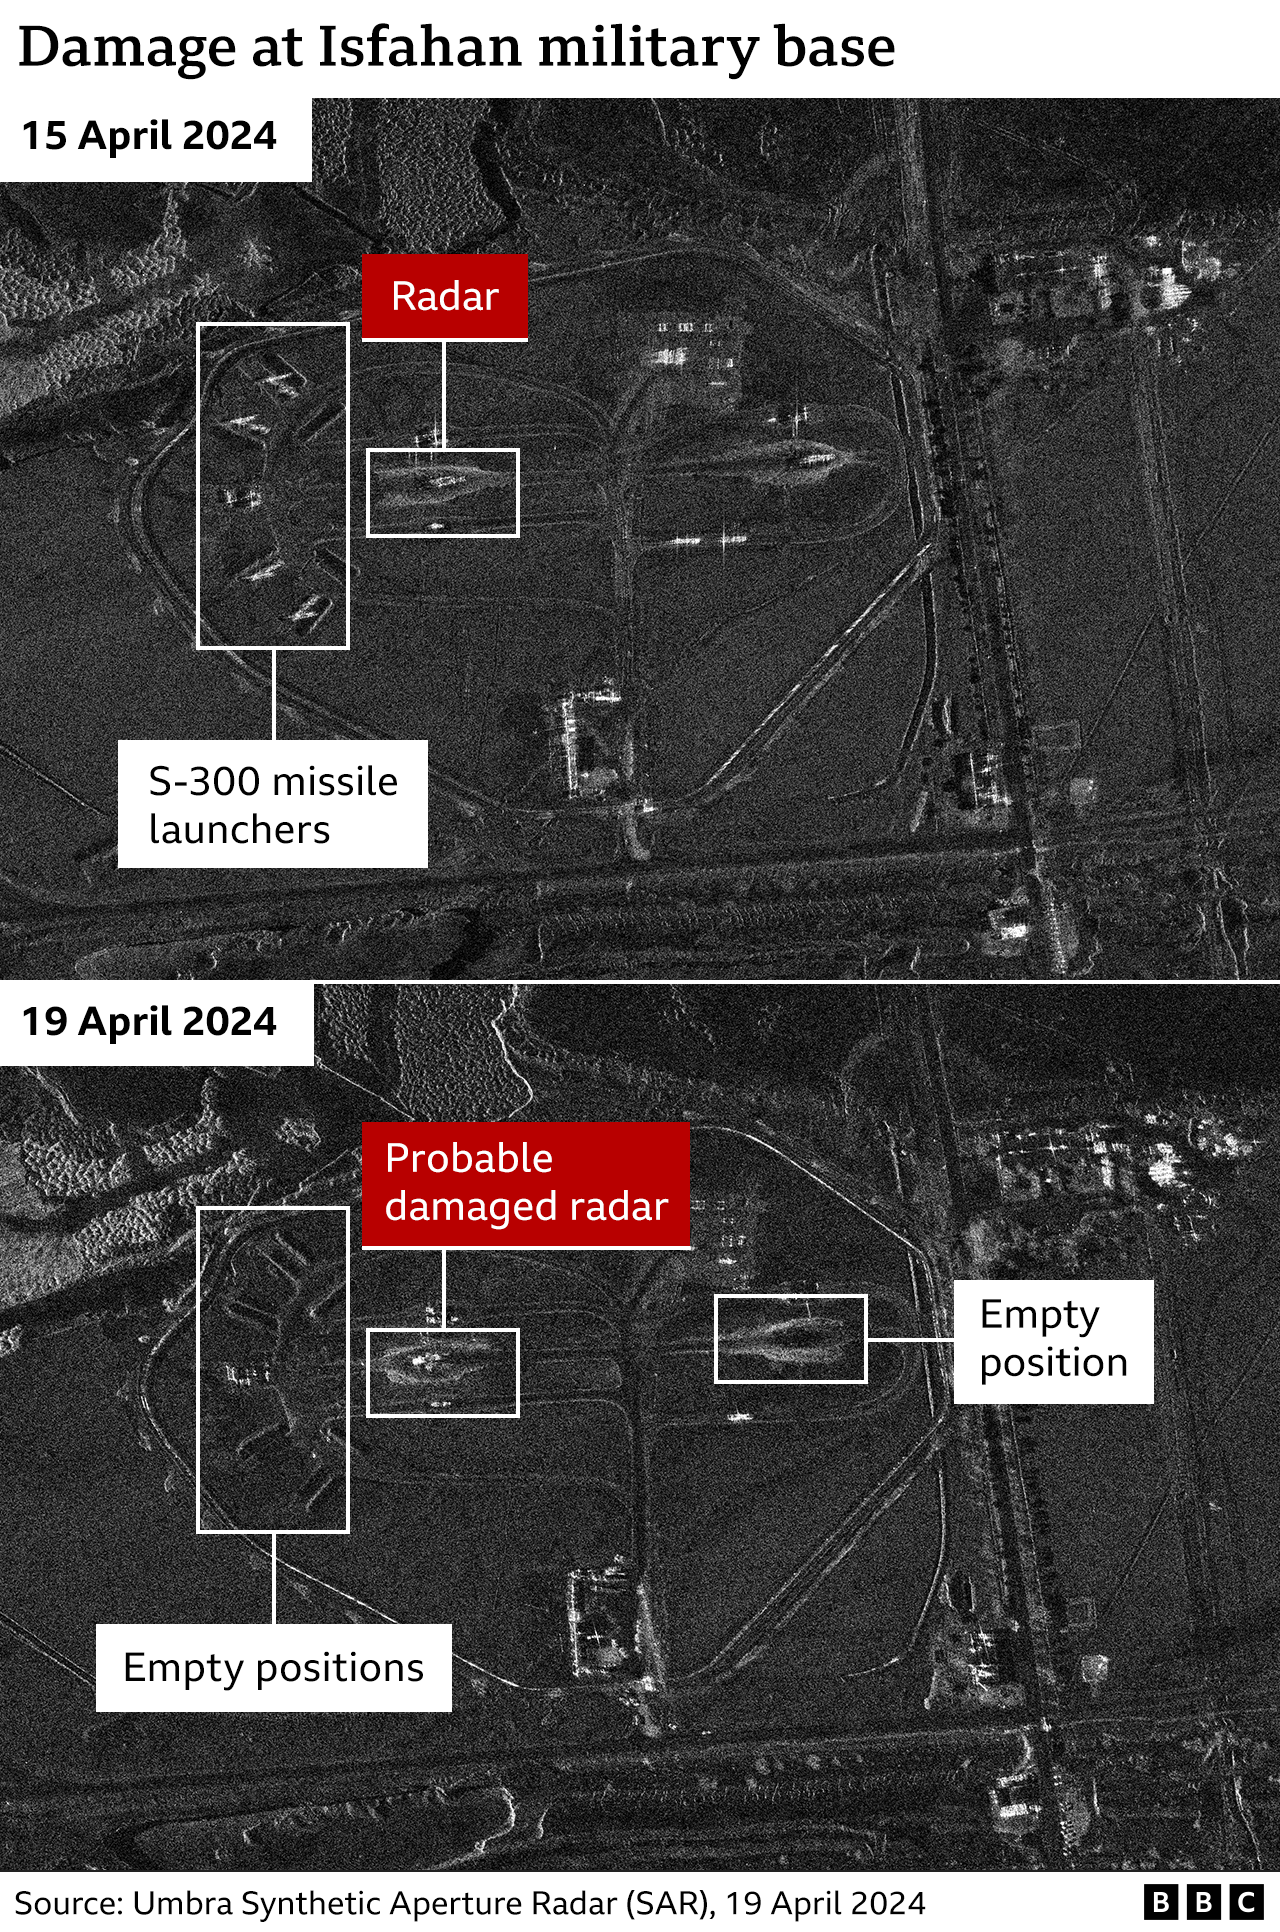 SAR Images show the probable damage of a S-300 air defence system located at the north-western corner of the Shikari airbase, Iran.